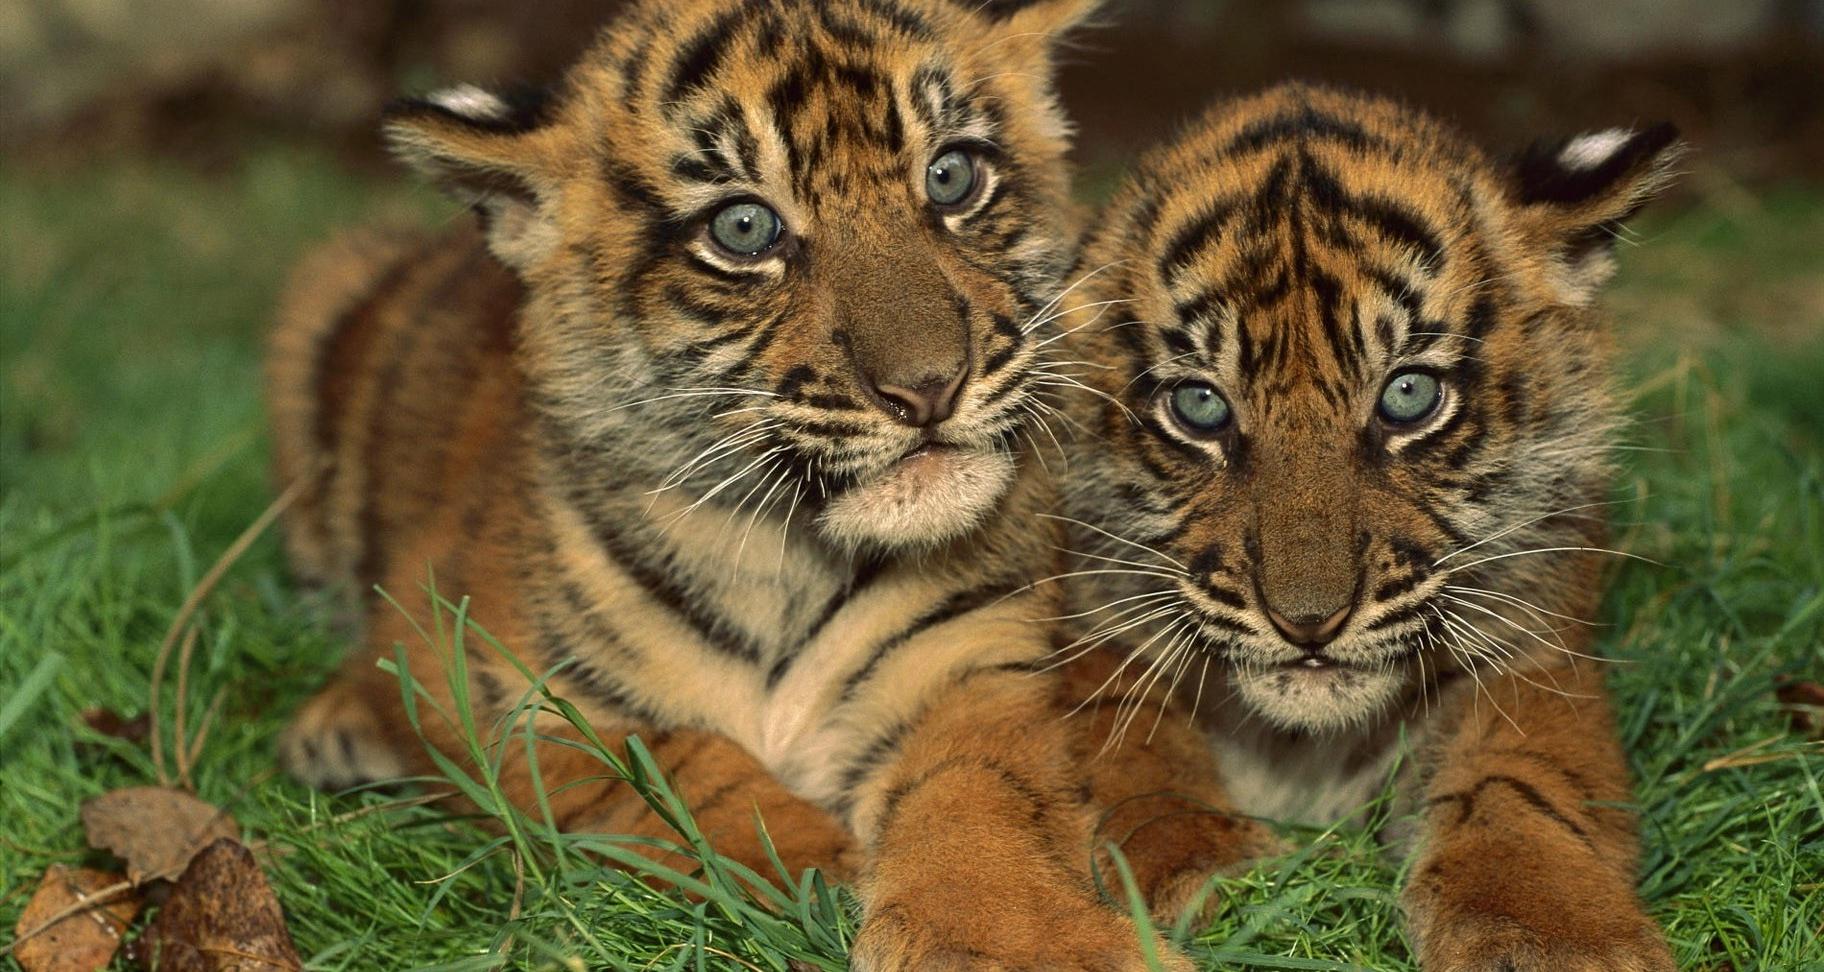 Displaying Baby Tigers Picture for Your Website on Animal Picture